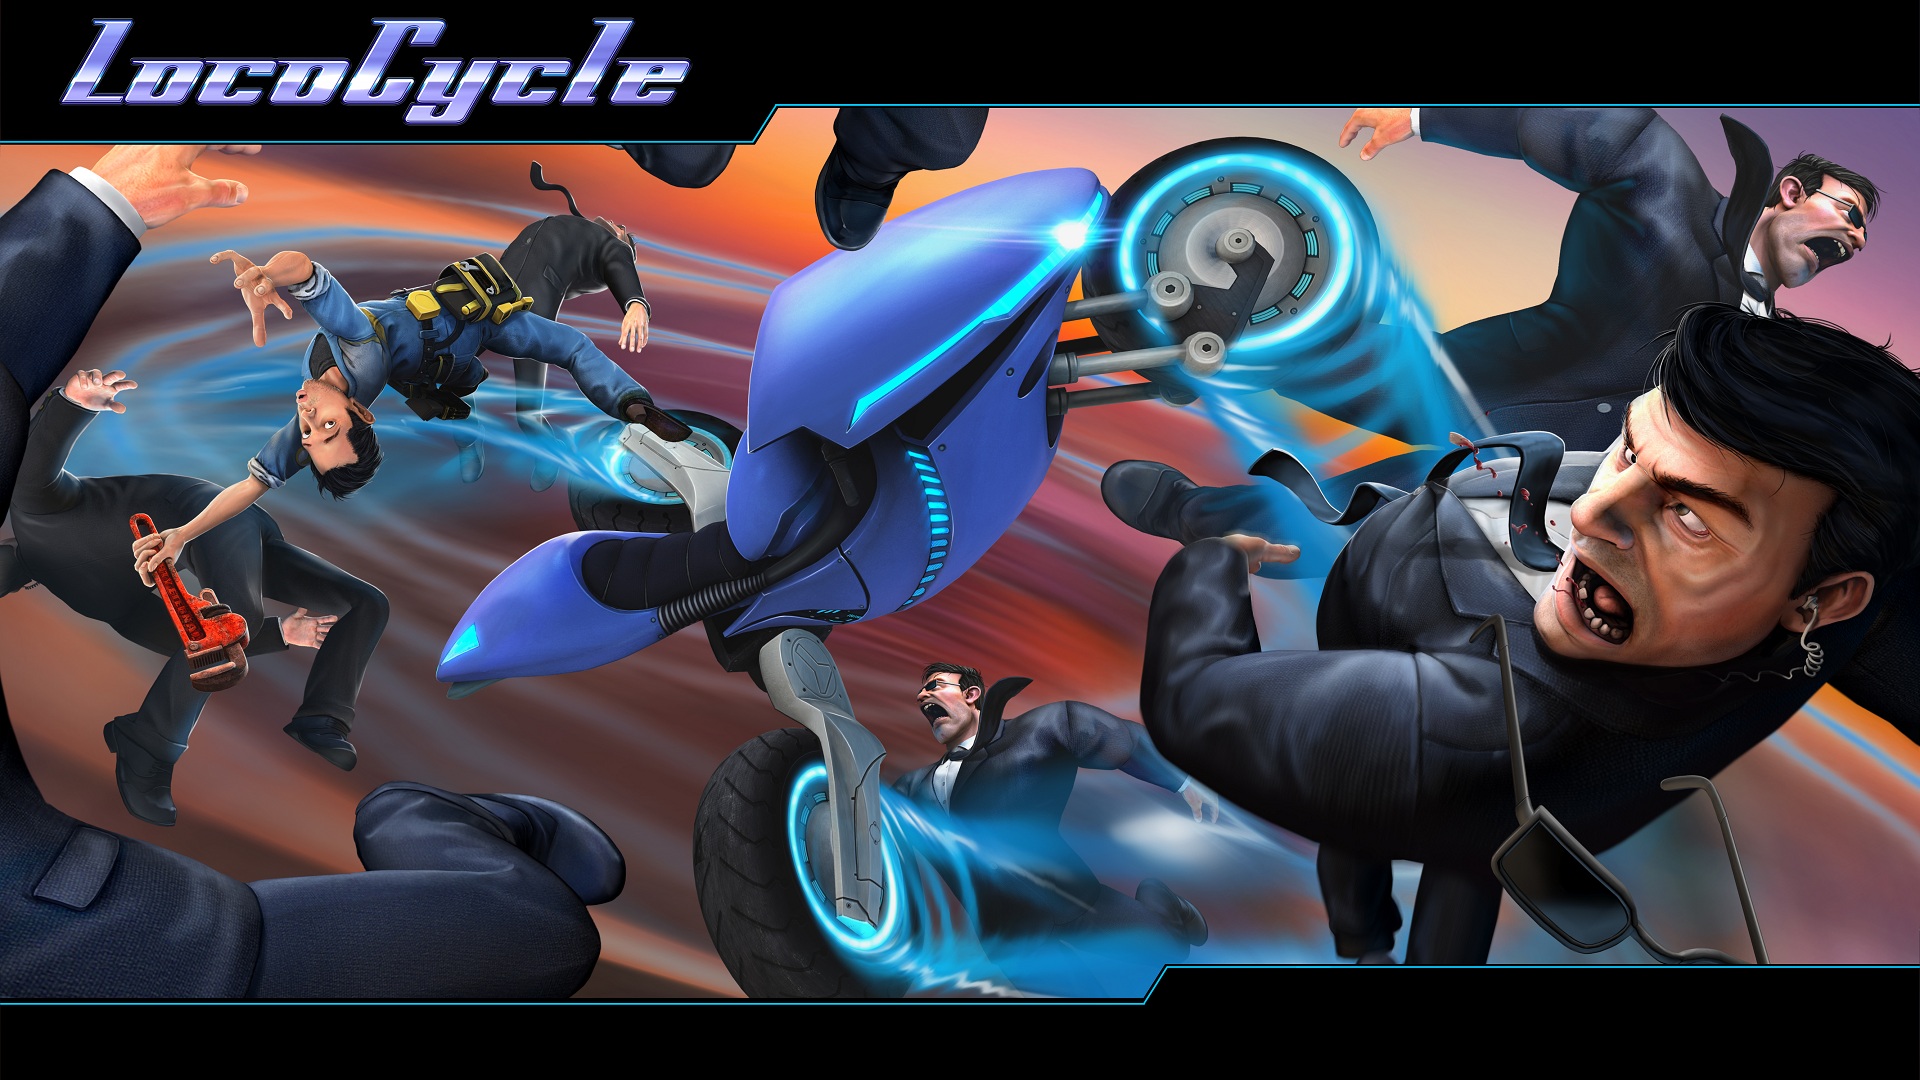 General 1920x1080 video games LocoCycle video game art